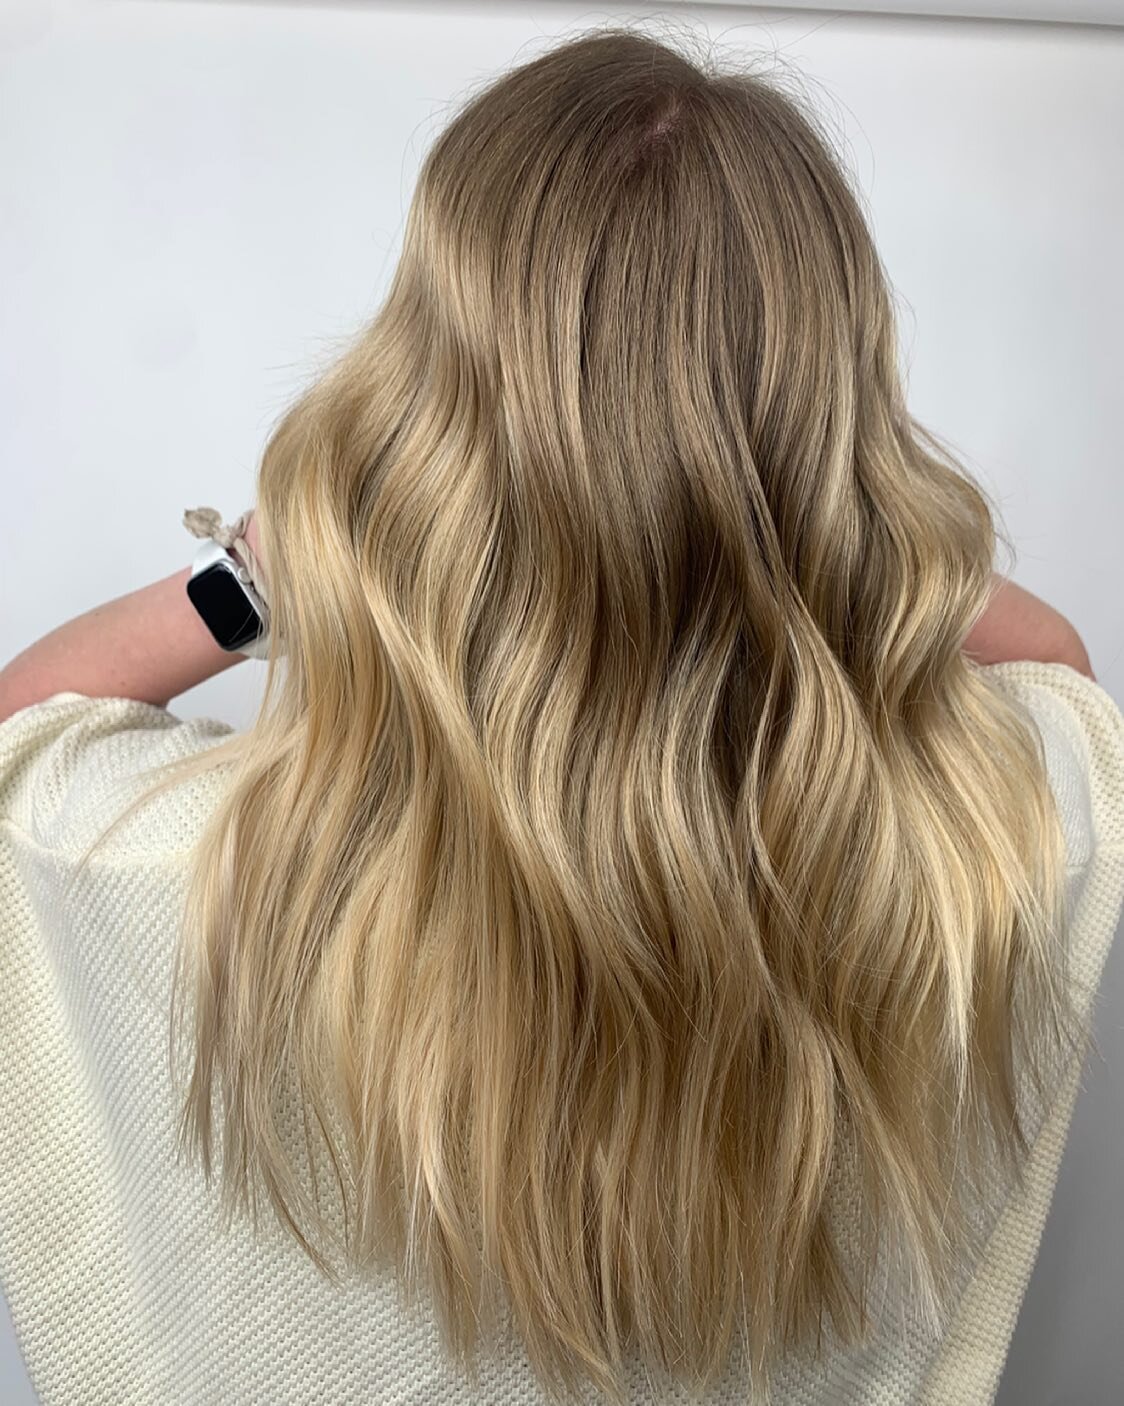 Sandy blonde for the win! ⭐️